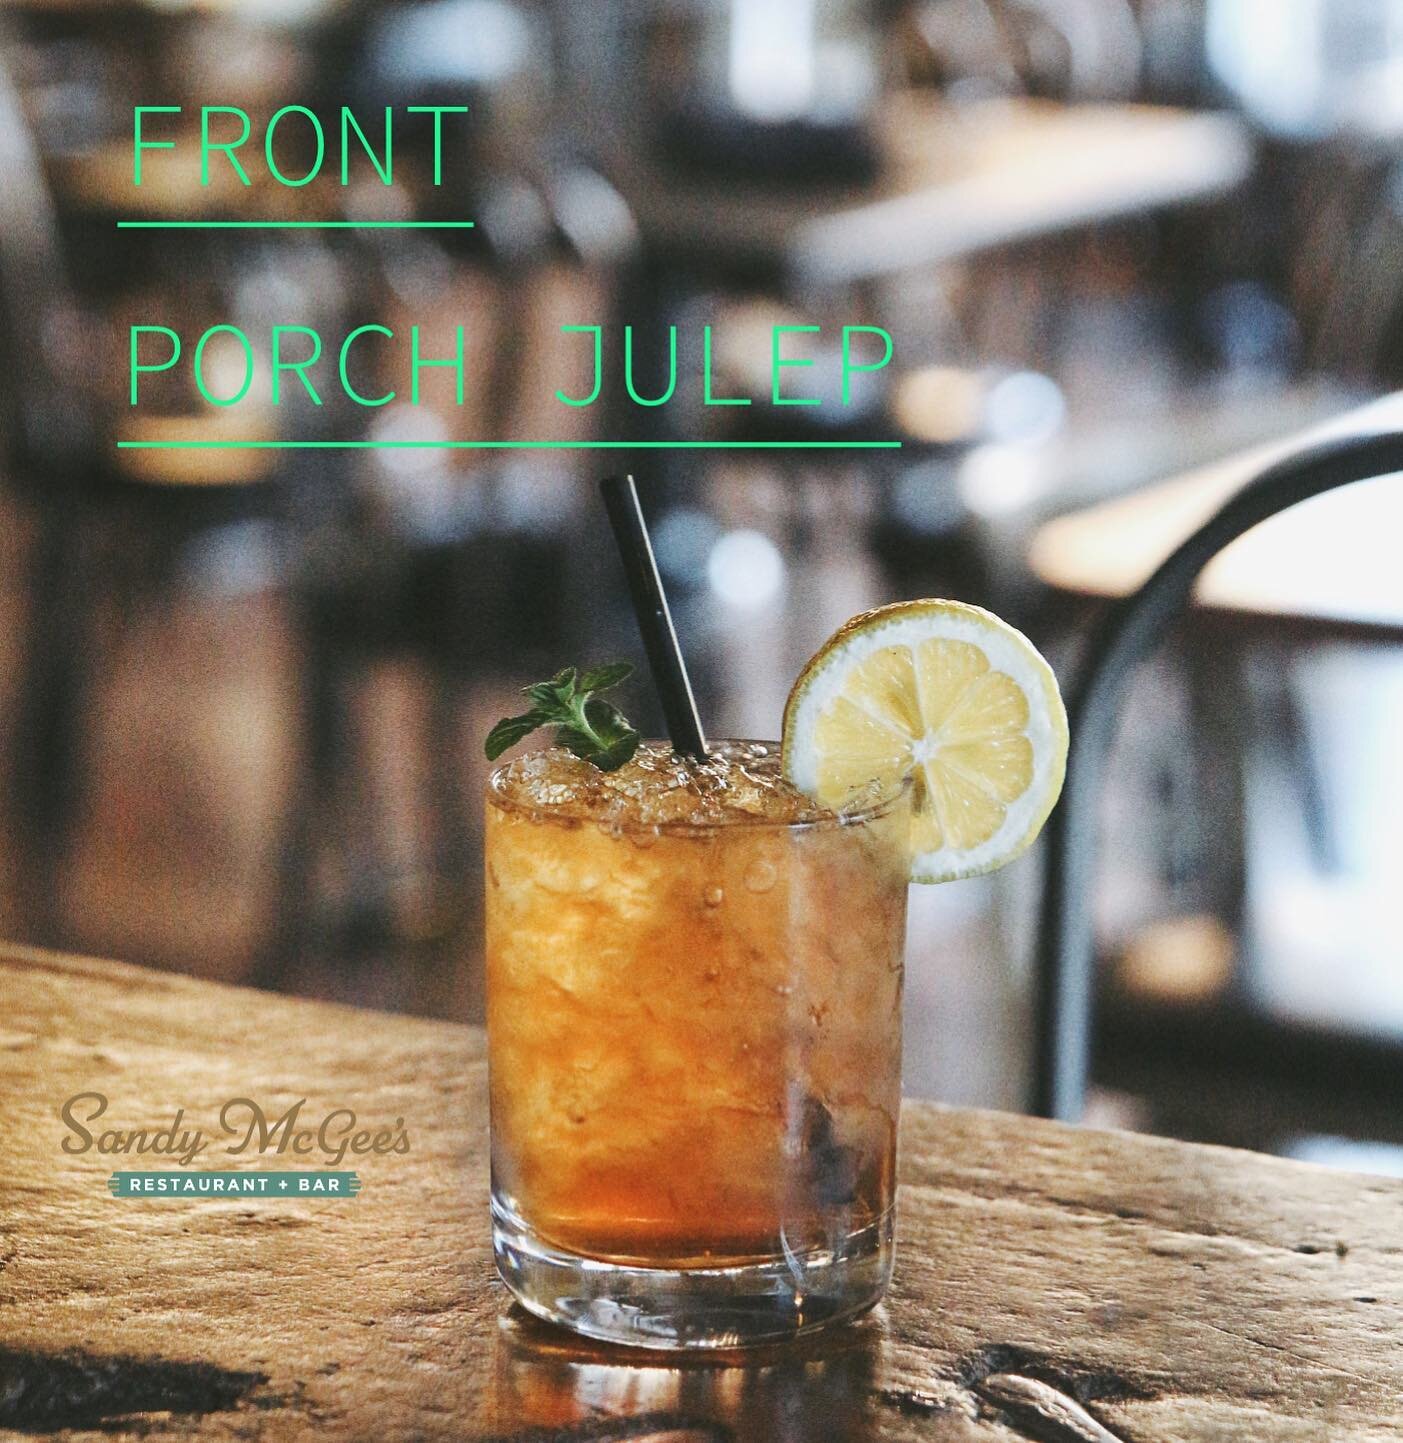 Come grab a refreshing Front Porch Julep and watch the Kentucky Derby this afternoon!
🐎🍋🍹🐎🍋🍹🐎🍋🍹